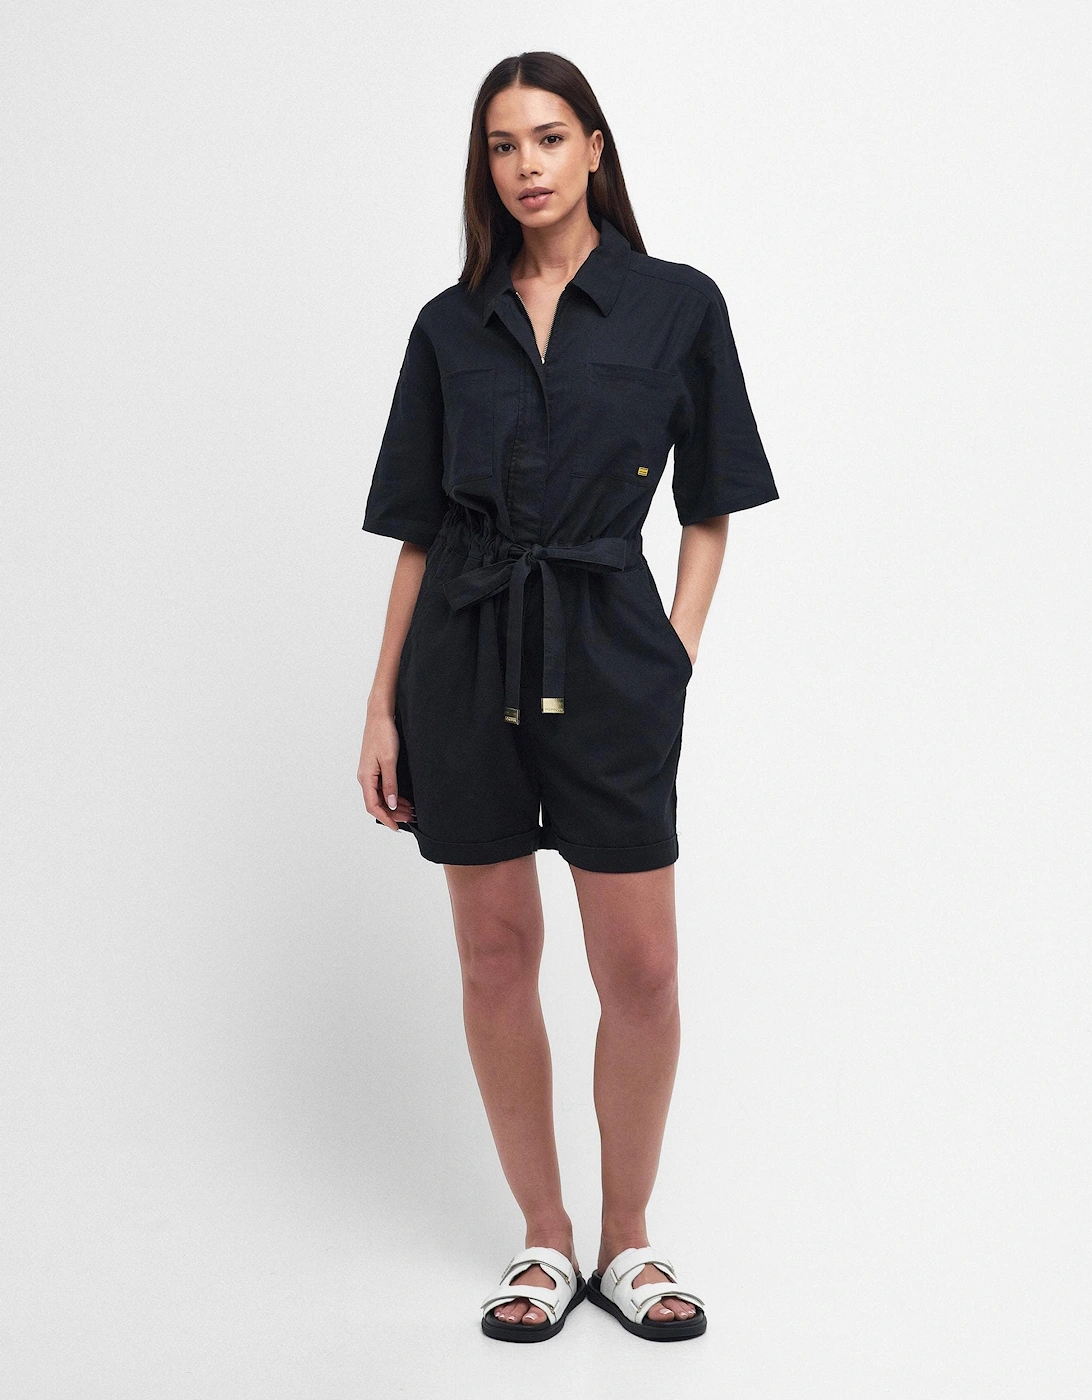 Rosell Womens Playsuit